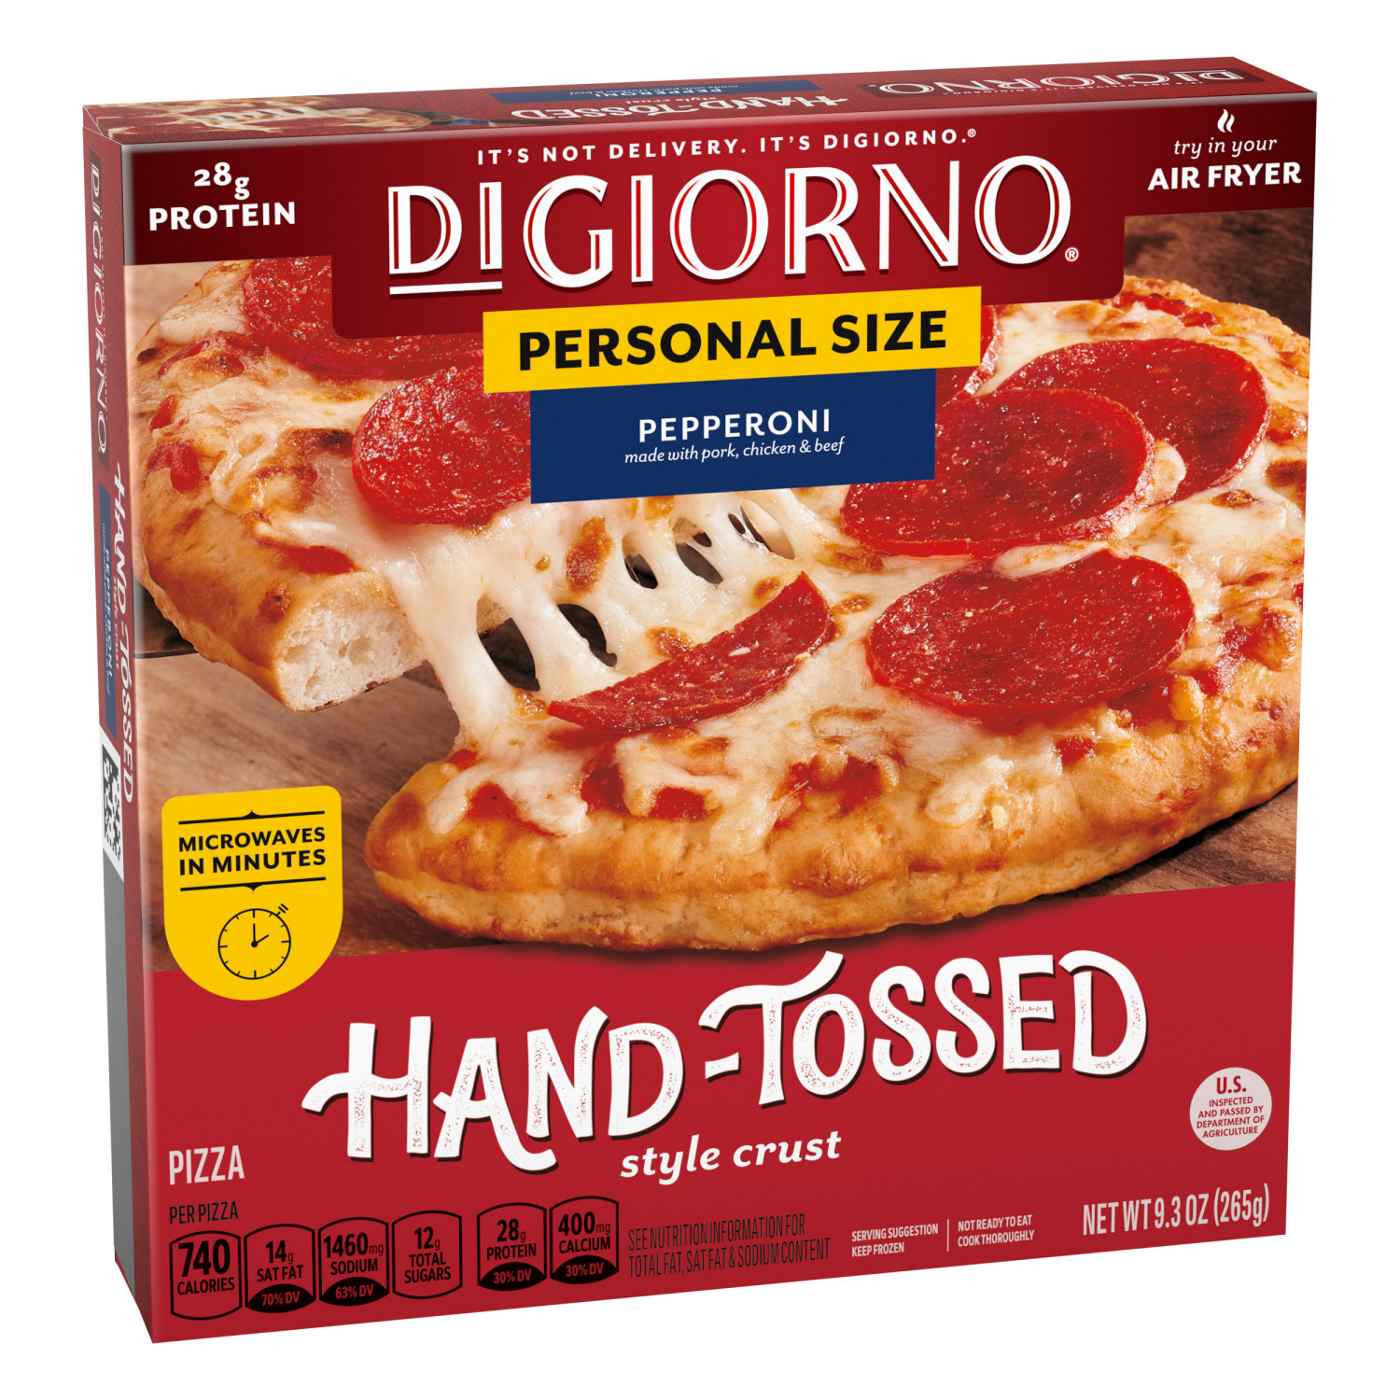 DiGiorno Hand-Tossed Crust Personal Size Frozen Pizza - Pepperoni; image 2 of 2